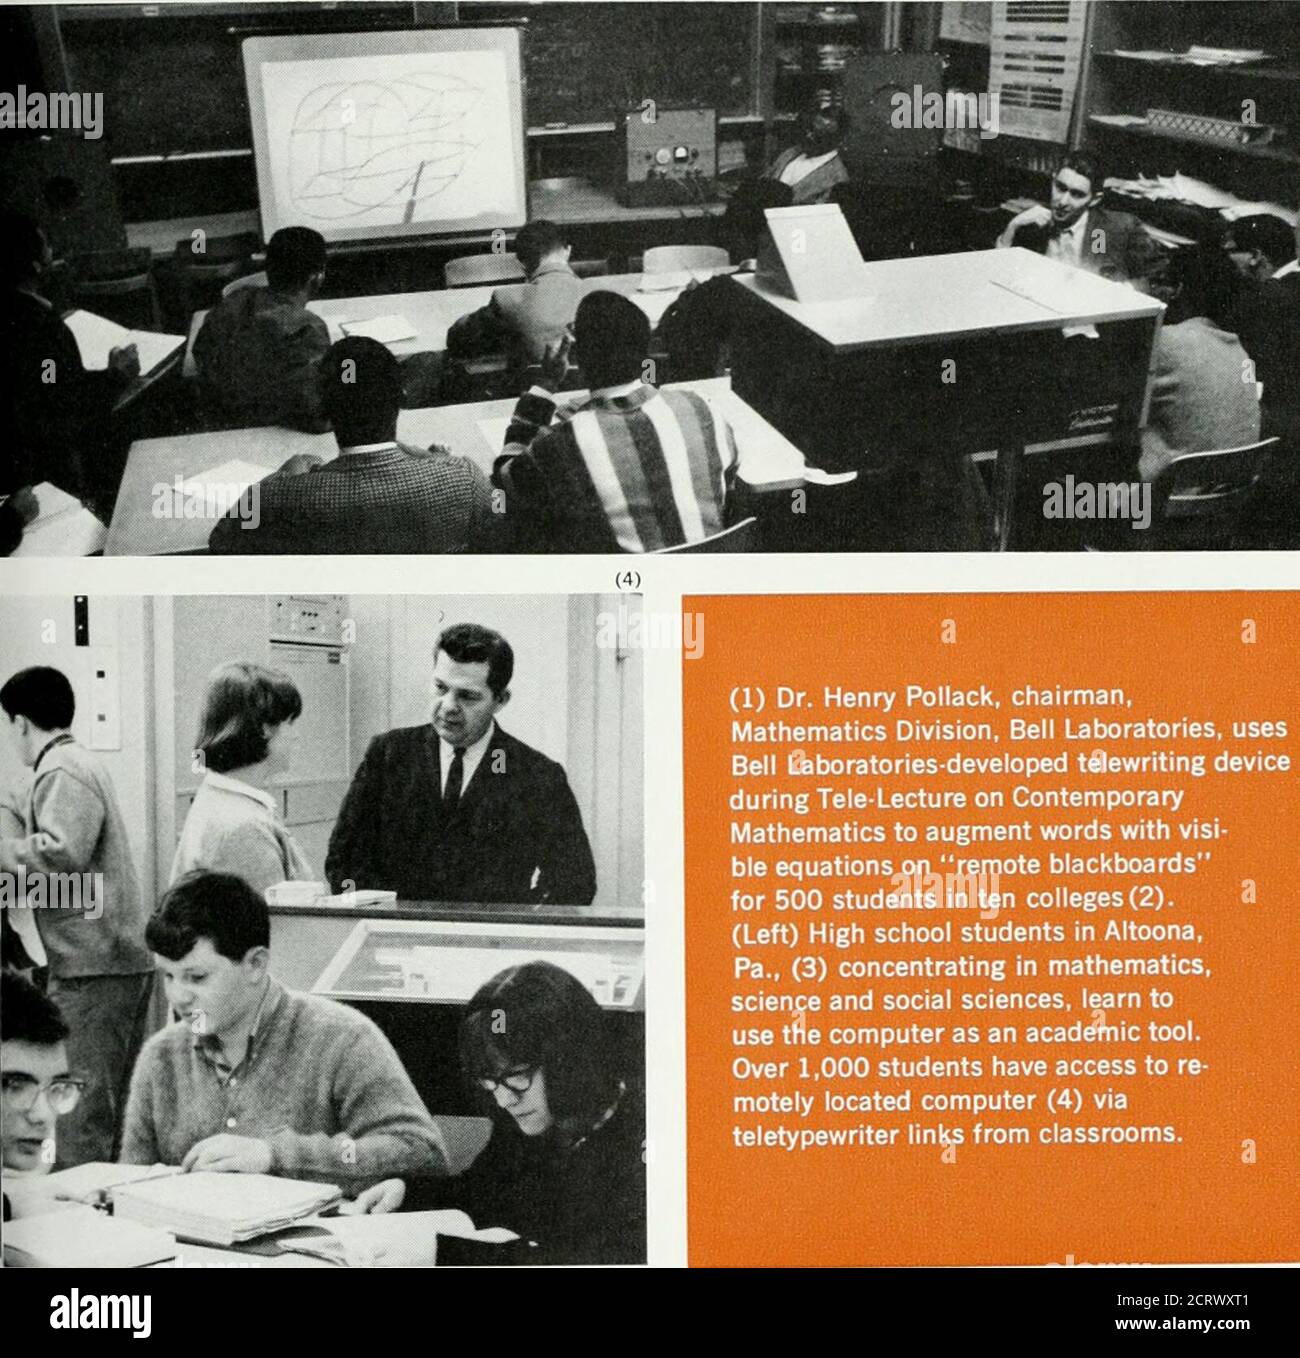 . Bell telephone magazine . 36. (1) Dr. Henry Pollack, chaiMathematics Division, Bell Laboratories, usesBell Laboratories-developed telewriting deviceduring Tele-Lecture on ContemporaryMathematics to augment words with visi-ble equations on remote blackboardsfor 500 students in ten colleges (2).(Left) High school students in Altoona,Pa., (3) concentrating in mathematics,science and social sciences, learn touse the computer as an academic tool.Over 1,000 students have access to re-motely located computer (4) viateletypewriter links from classrooms. 37 CommunicationsFor Education Stock Photo